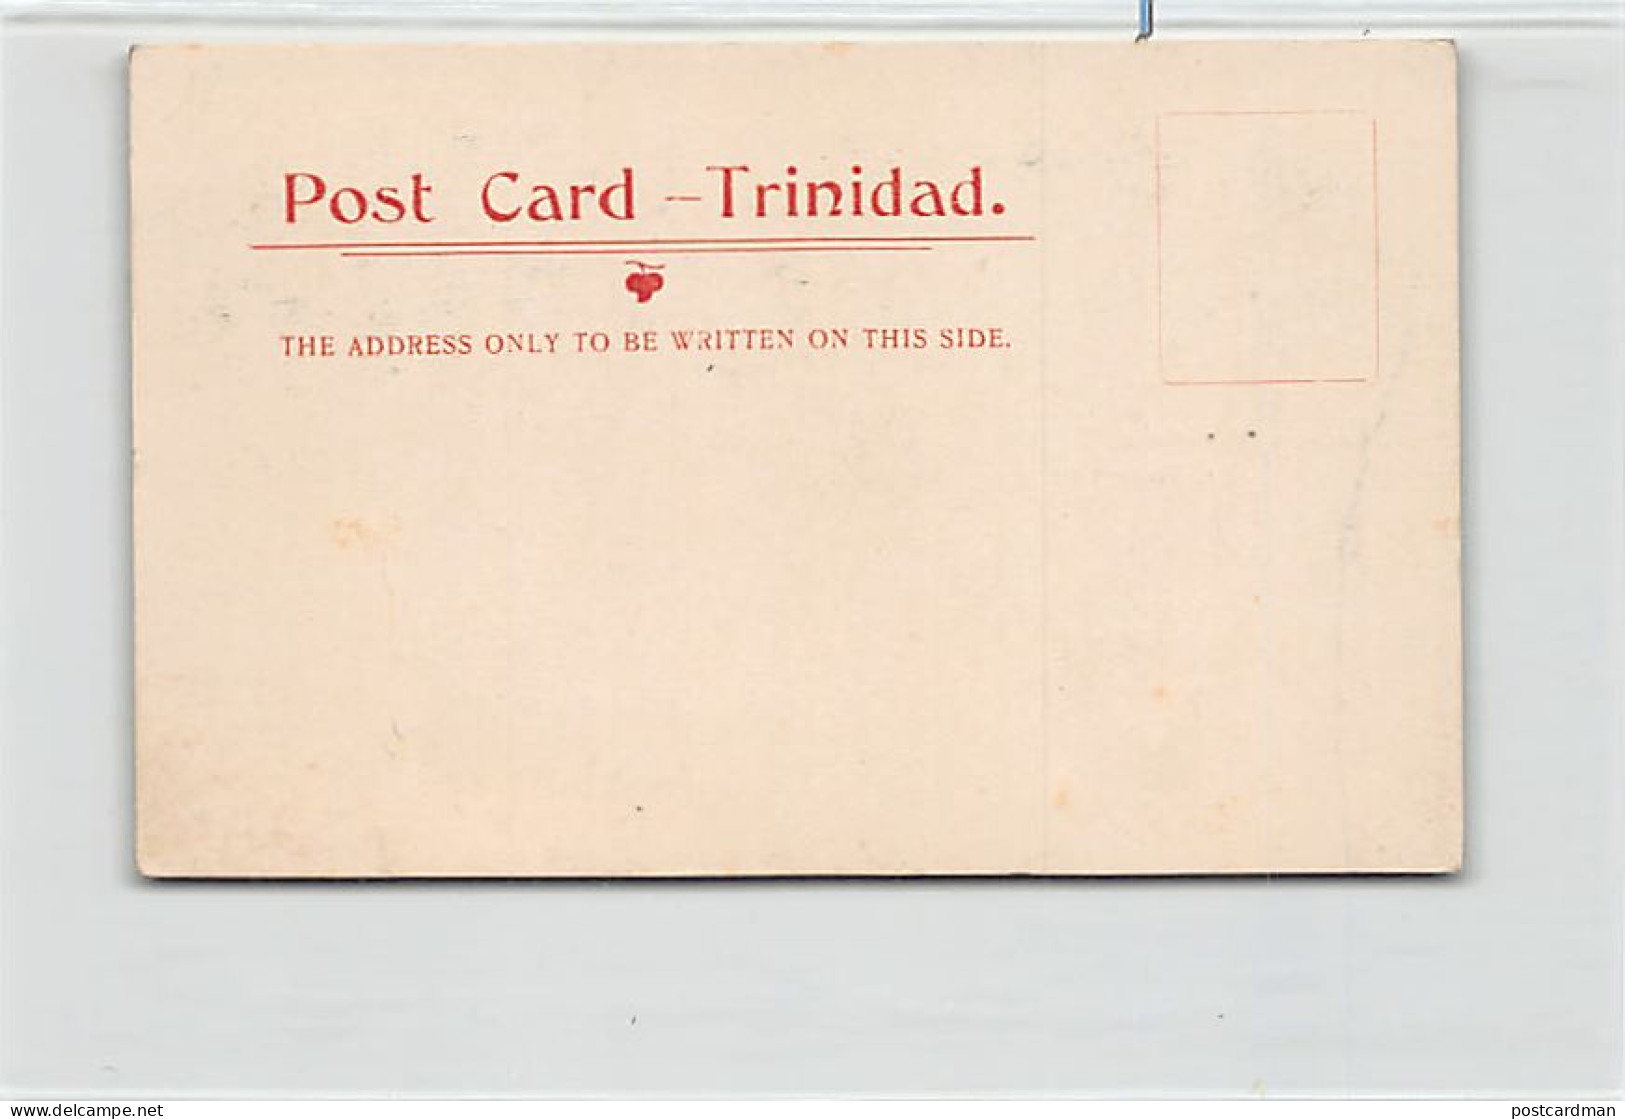 Trinidad - PORT OF SPAIN - Bonding Warehouse, St. Vincent Street - SMALL SIZE Early Forerunner Postcard - Publ. Unknown  - Trinidad